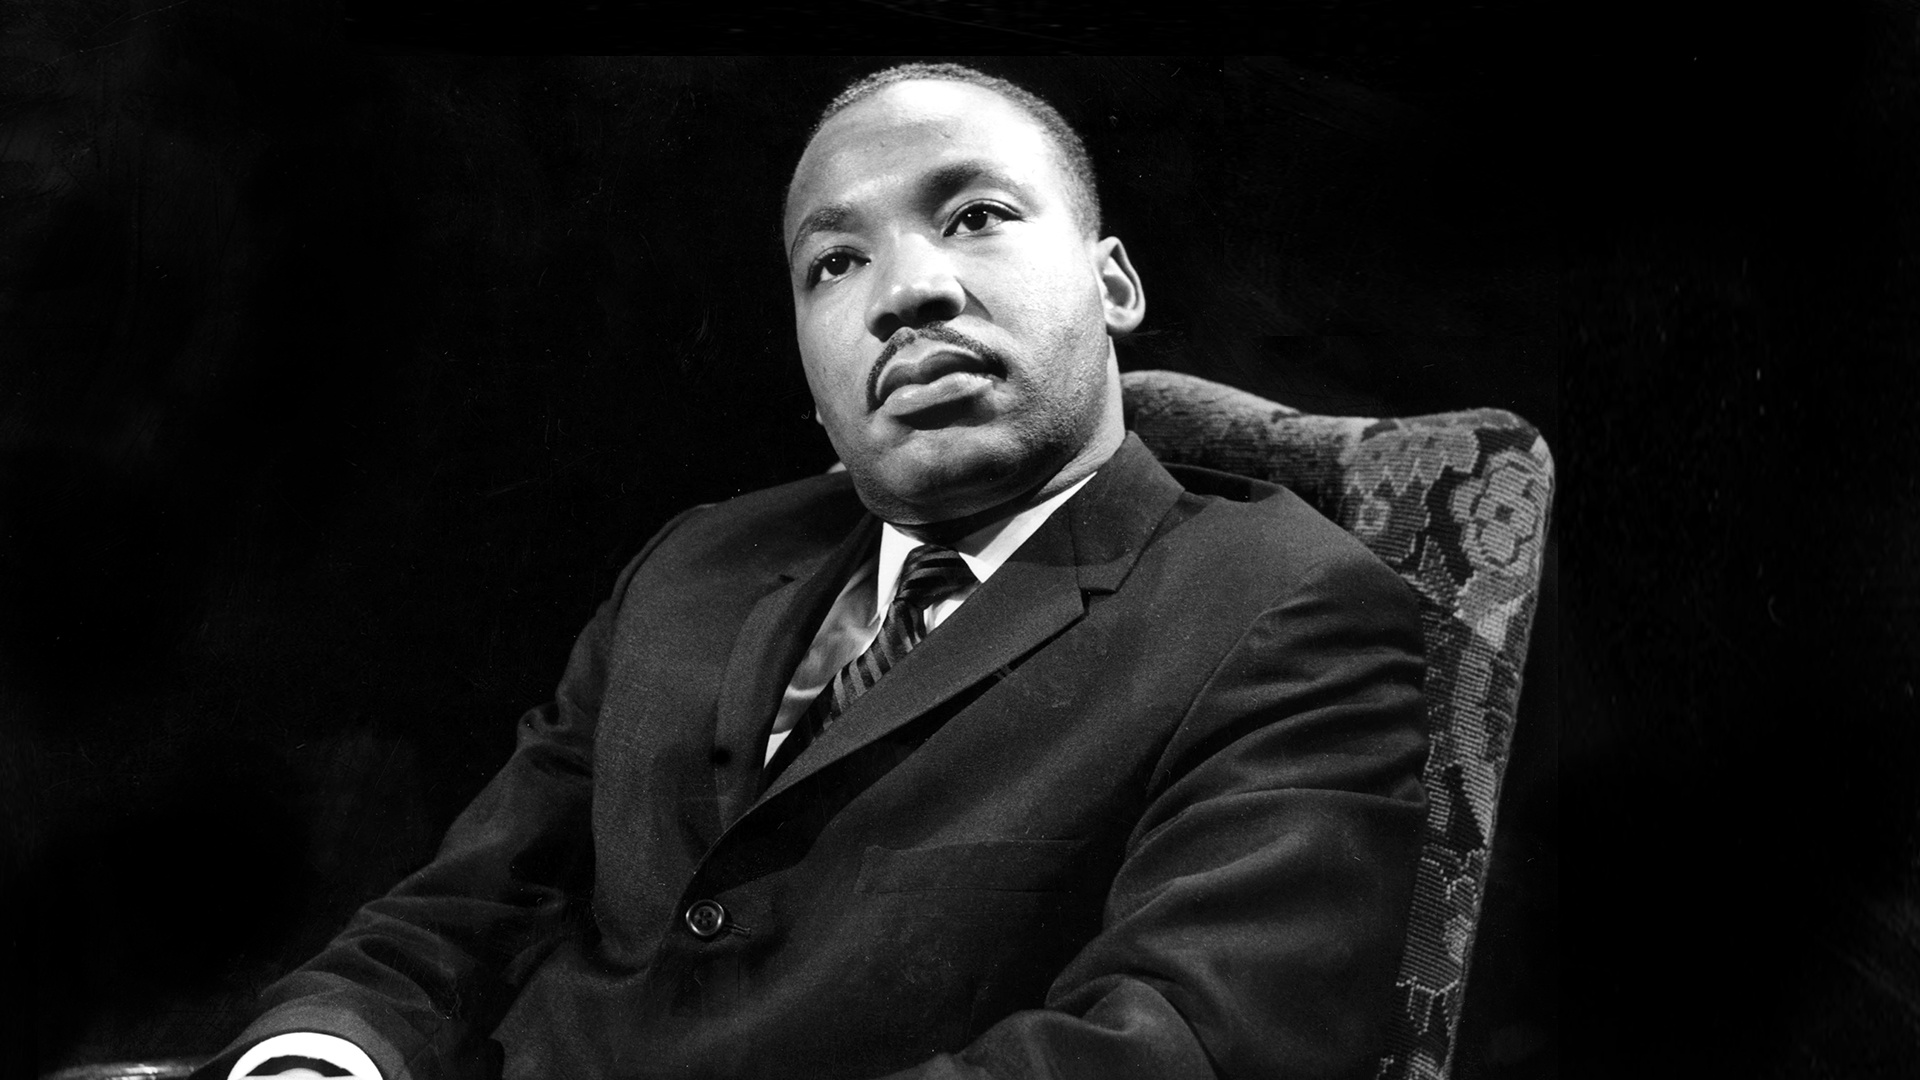 Martin Luther King Jr., Iconic wallpapers, Inspirational leader, Powerful imagery, 1920x1080 Full HD Desktop